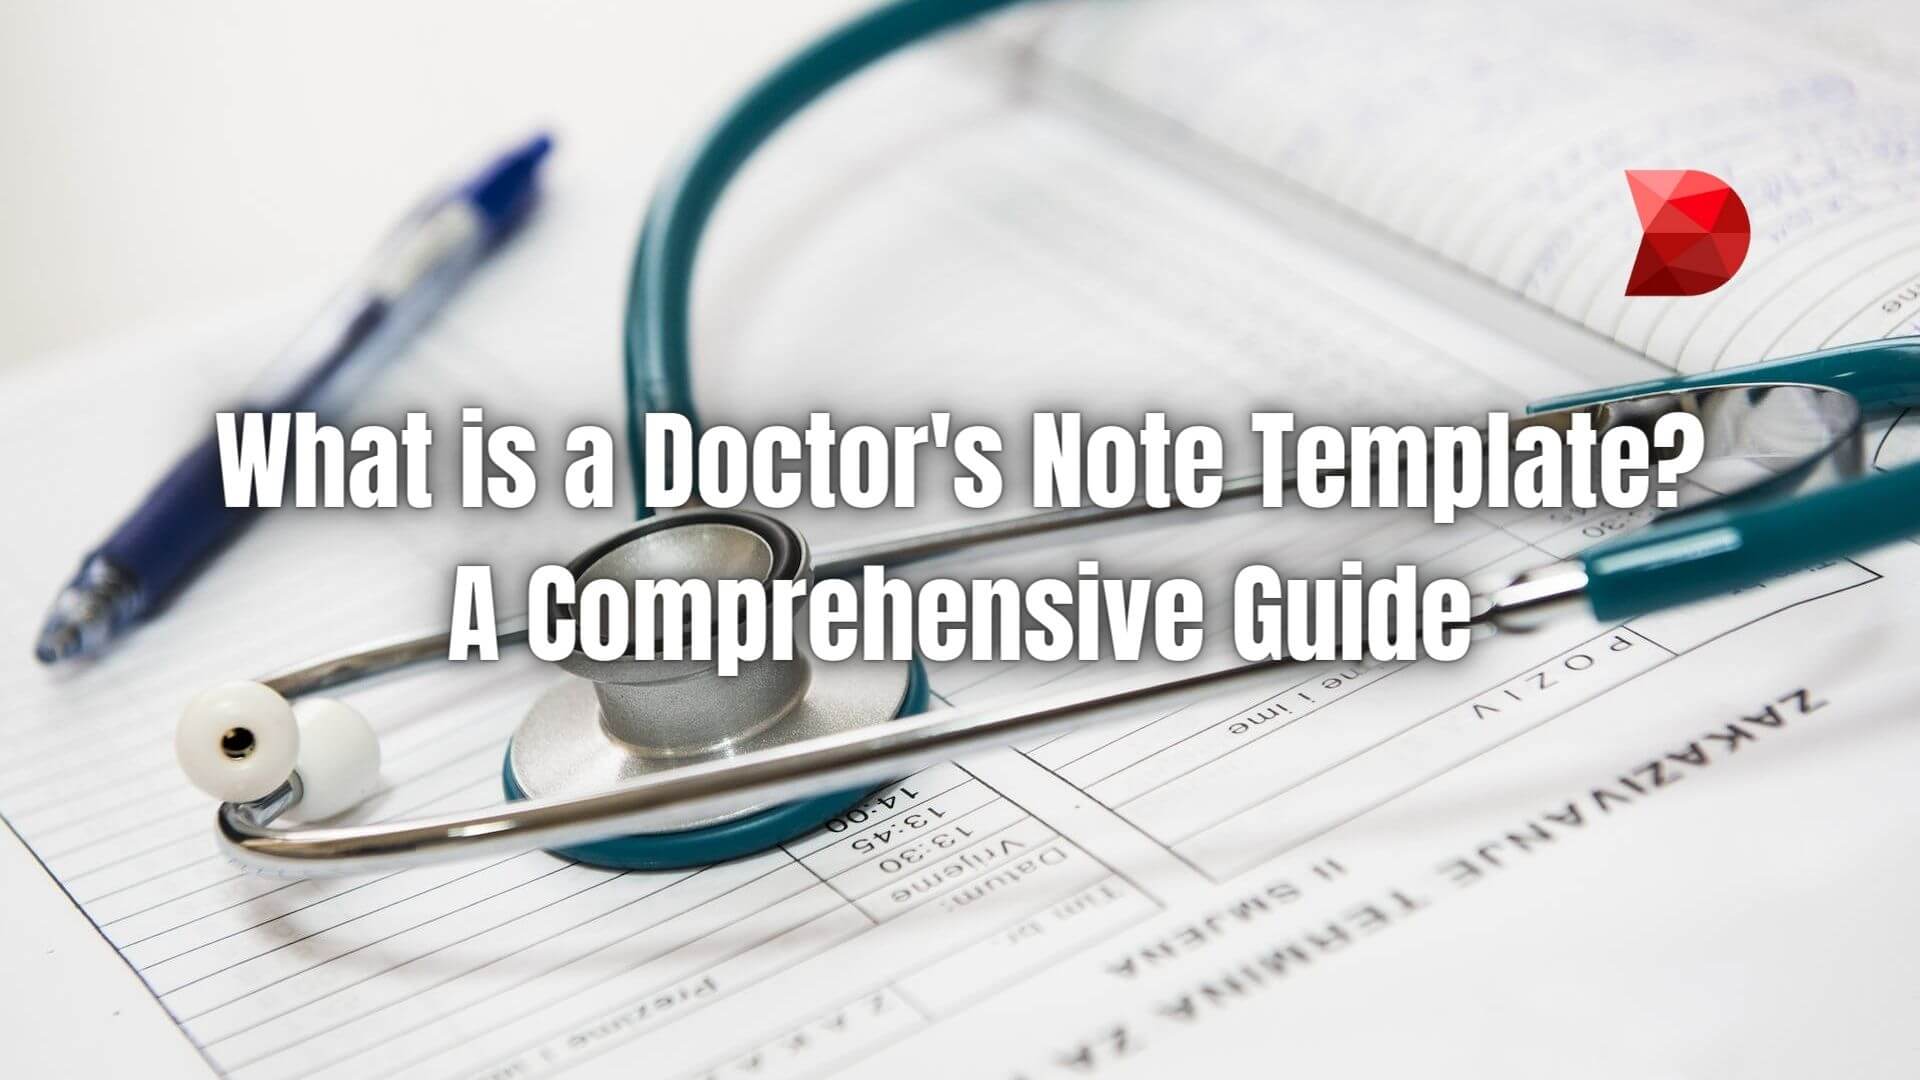 Empower yourself with our doctor's note template guide! Click here to learn how to create professional and effective notes in minutes.